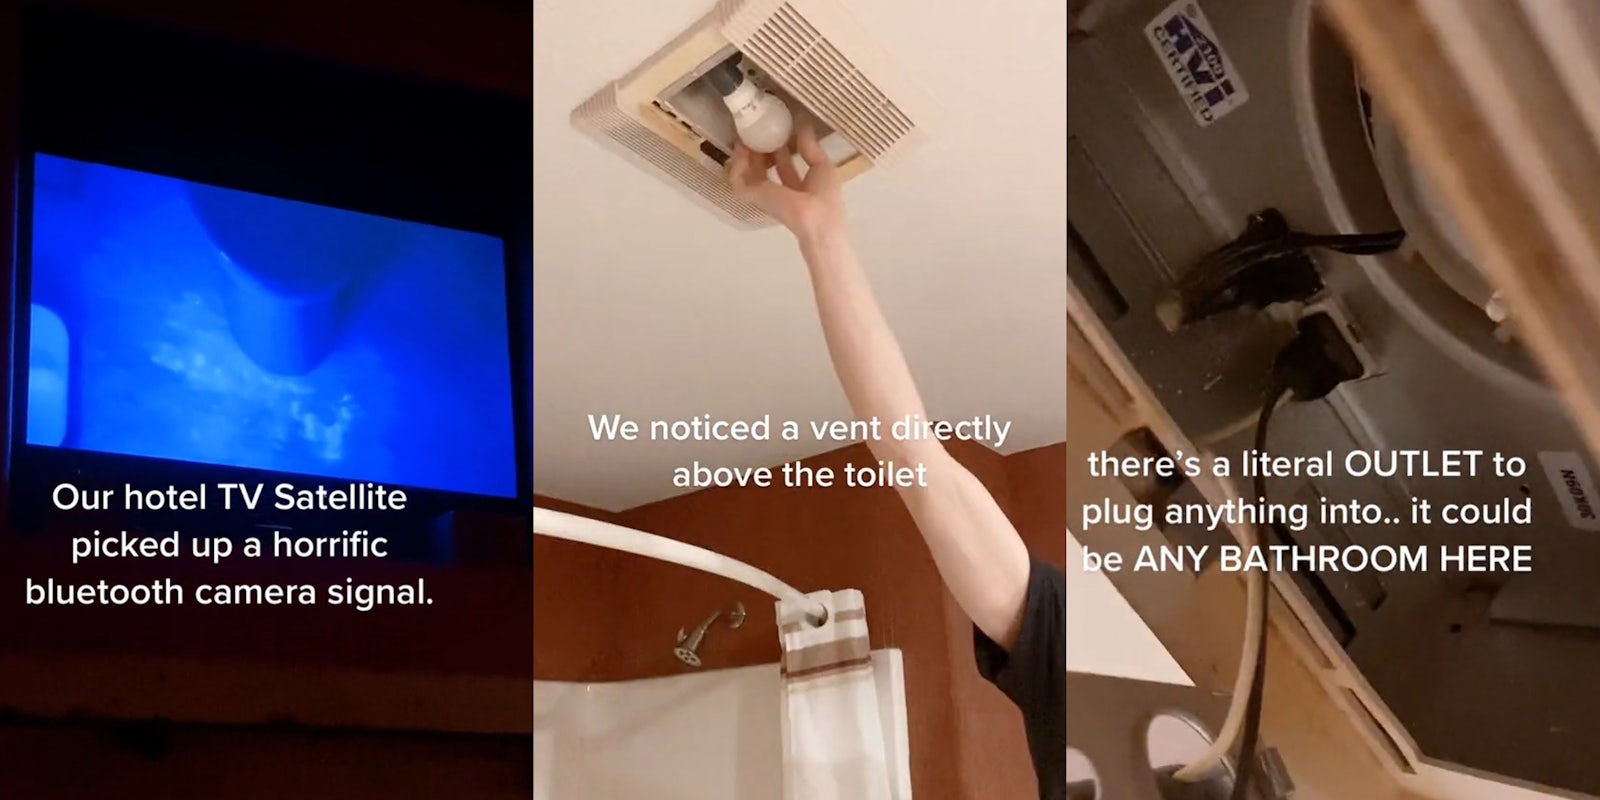 hotel tv with hidden camera footage on screen caption 'Our hotel TV Satellite picked up a horrific bluetooth camera signal' (l) hotel bathroom ceiling vent caption 'We noticed a vent directly above the toilet' (c) vent with outlet inside caption 'there's a literal OUTLET to plug anything into.. it could be ANY BATHROOM HERE' (r)